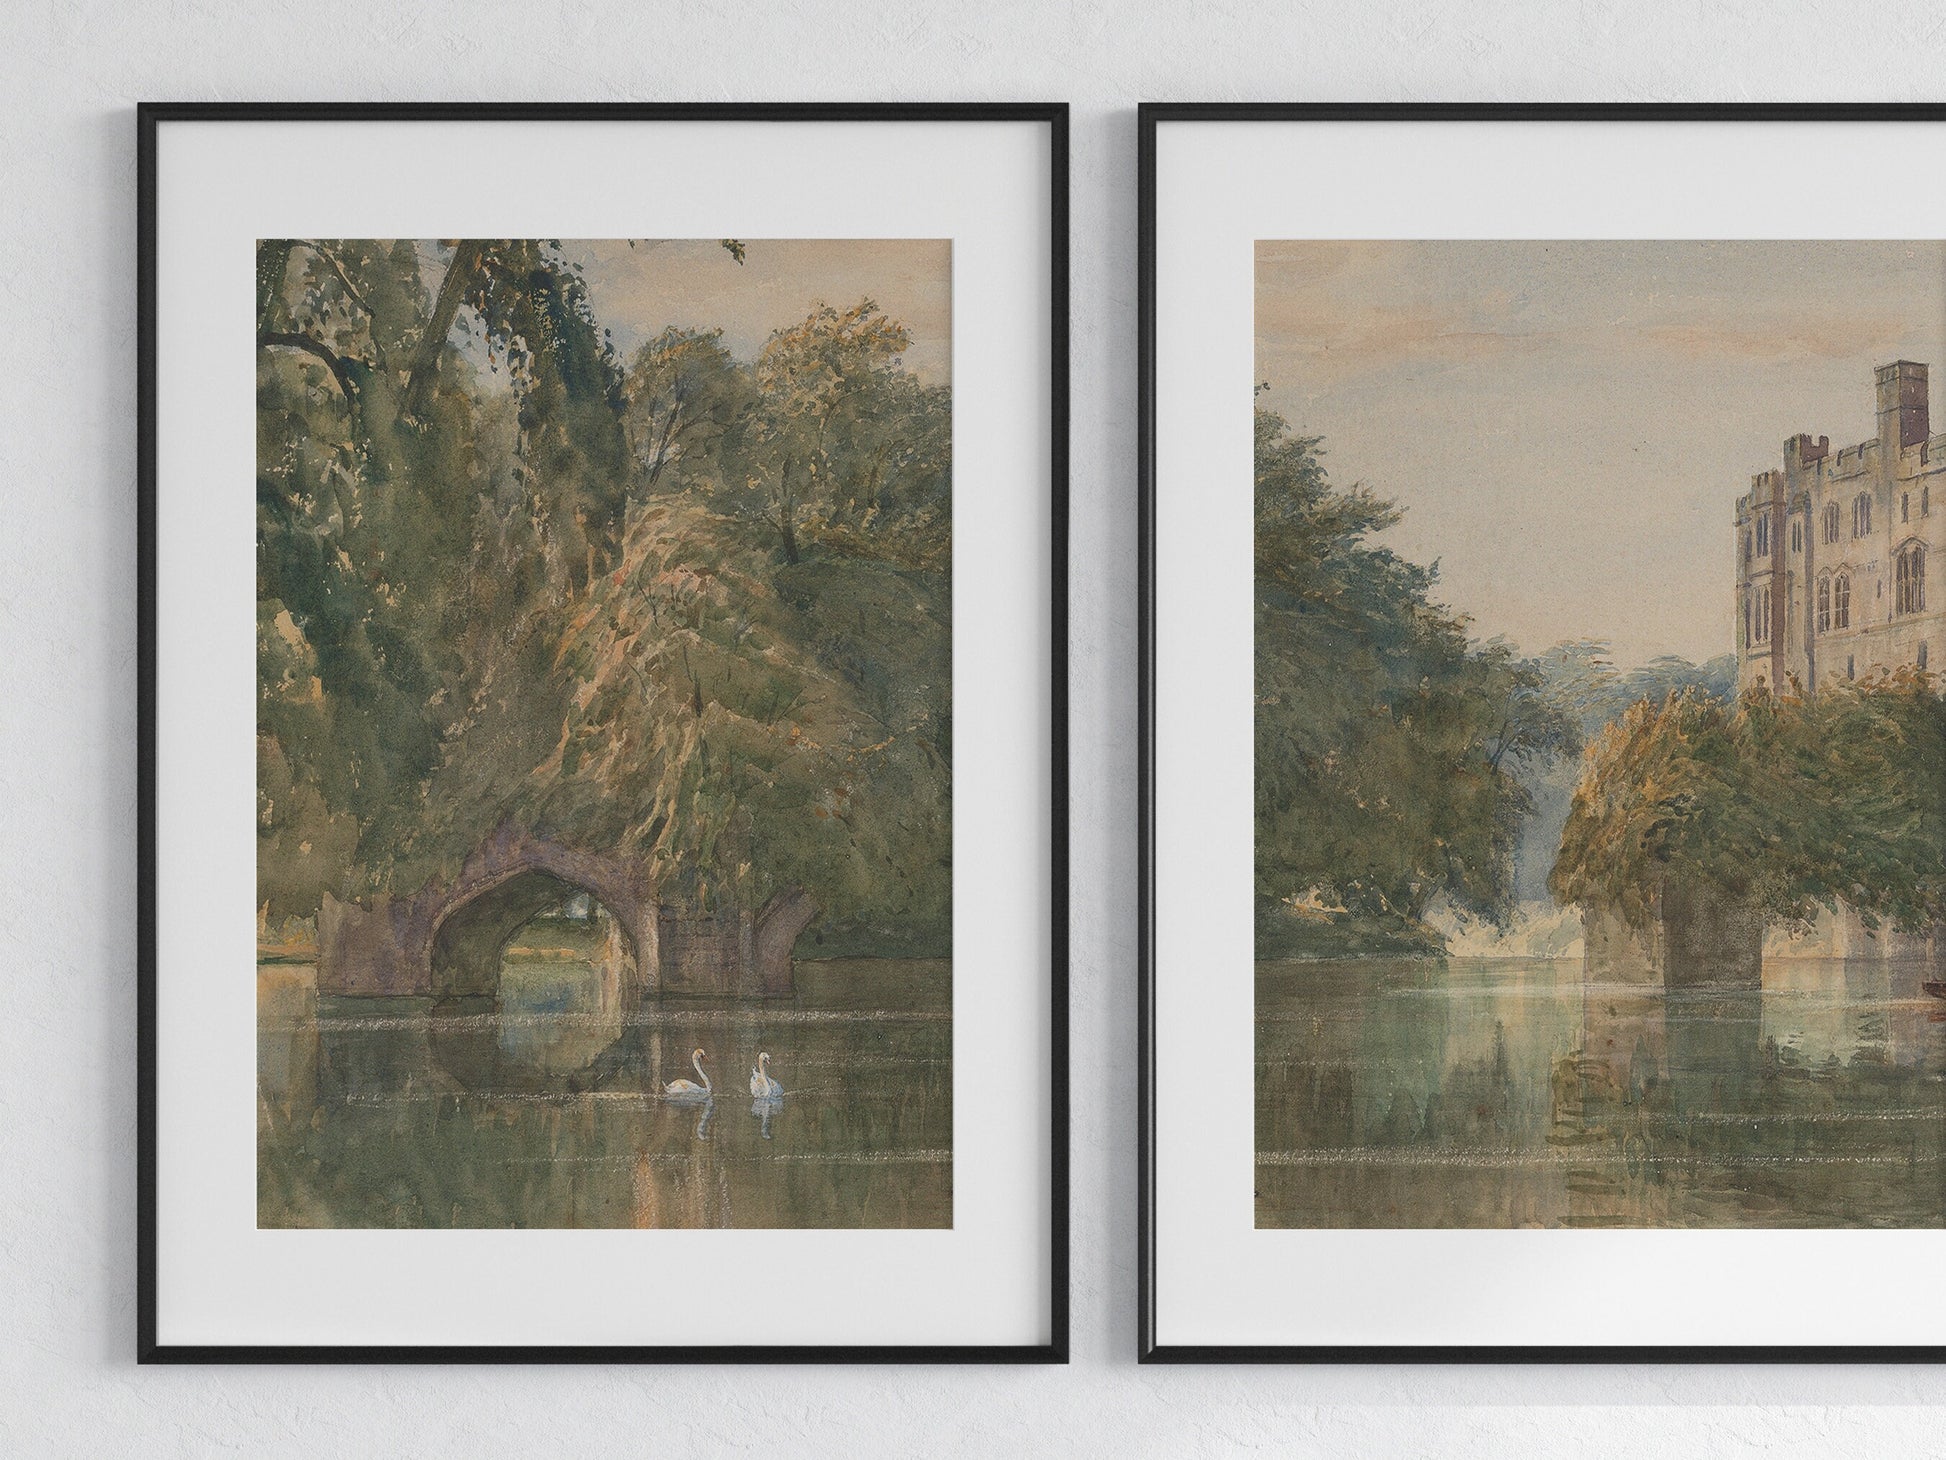 Swans Wall Art, Set of 3 Prints, Swans, Vintage Style, Retro Image, Bedroom Décor, Living Room, A5/A4/A3/A2, Warwick Castle, Warwick Print